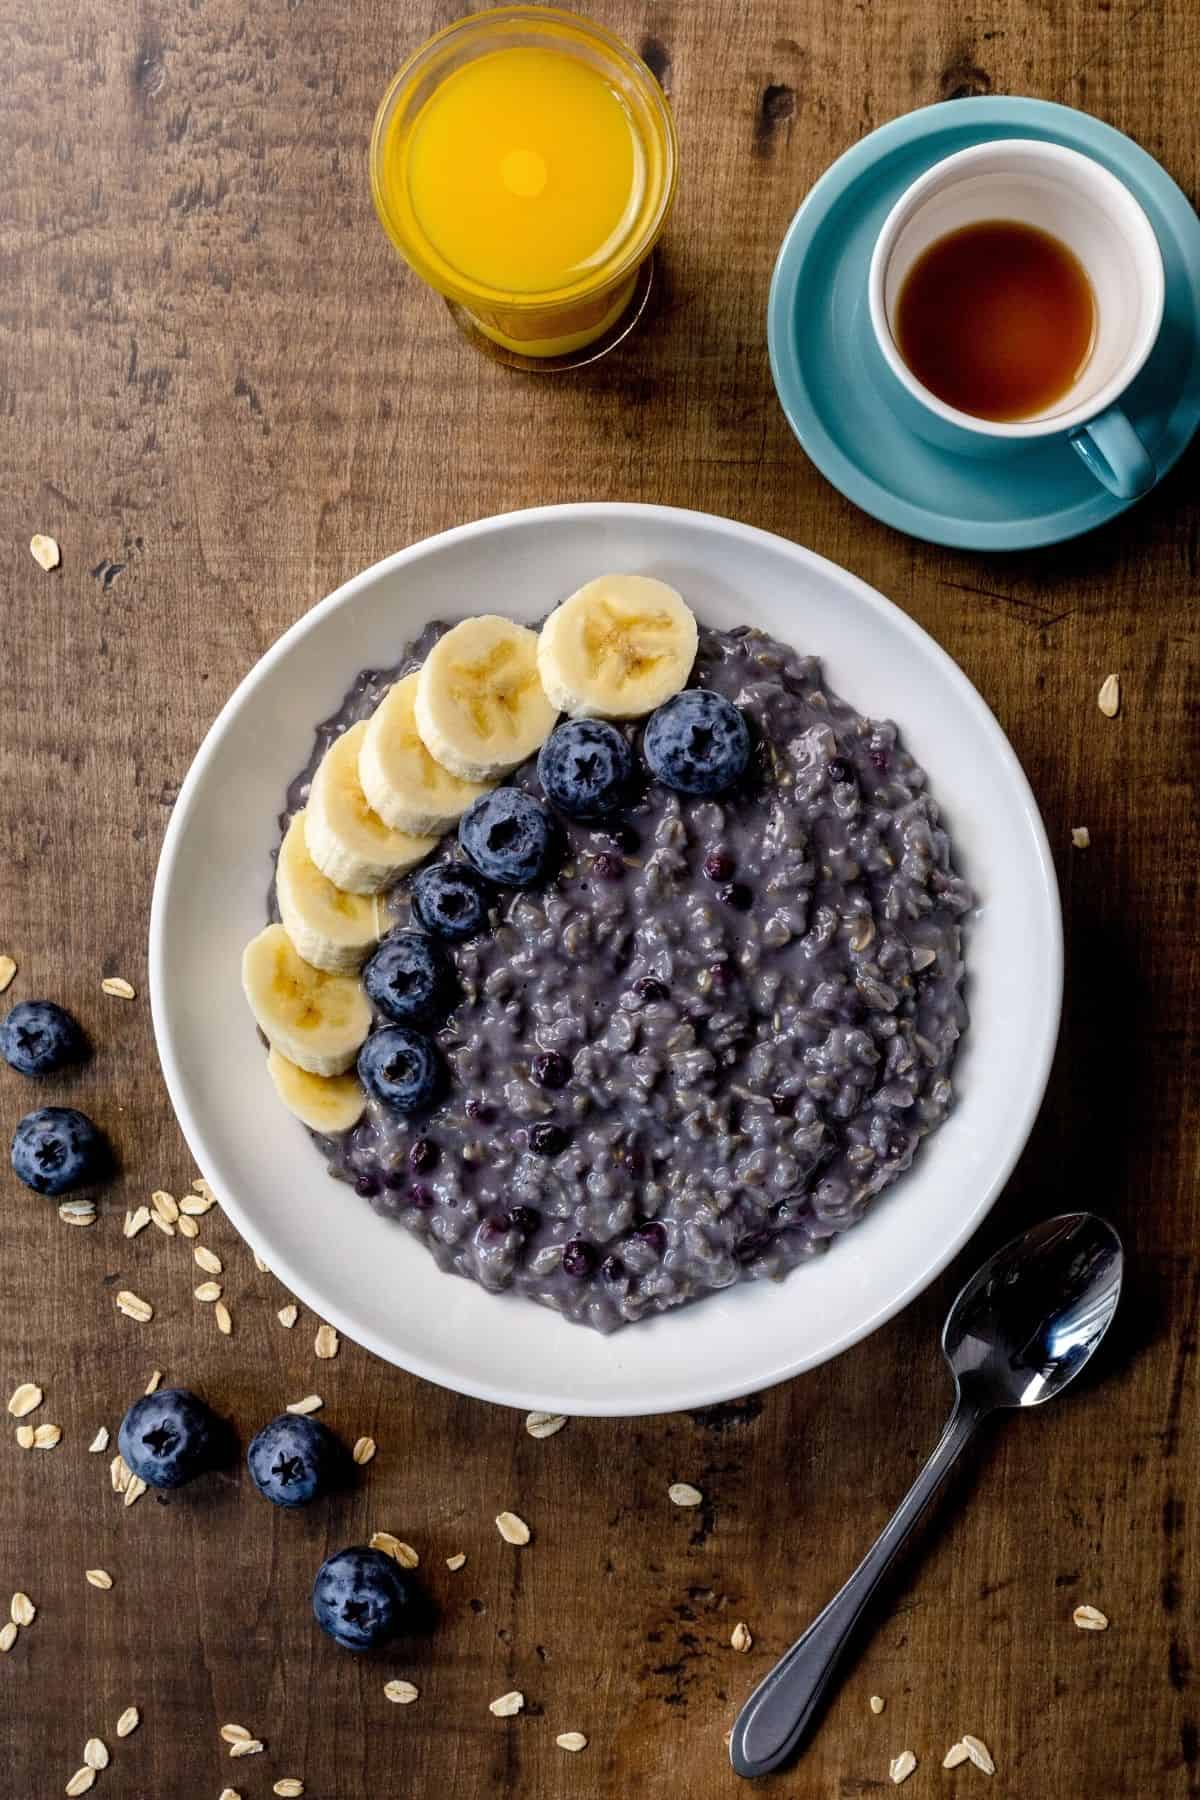 A single bowl of blueberry oatmeal on a wood tabletop. Sliced bananas and fresh blueberries are on top of the oatmeal. A spoon is next to the bowl. Fresh blueberries and oats are sprinkled around. A small cup of coffee and a small glass of orange juice are in the top right corner of the photo.